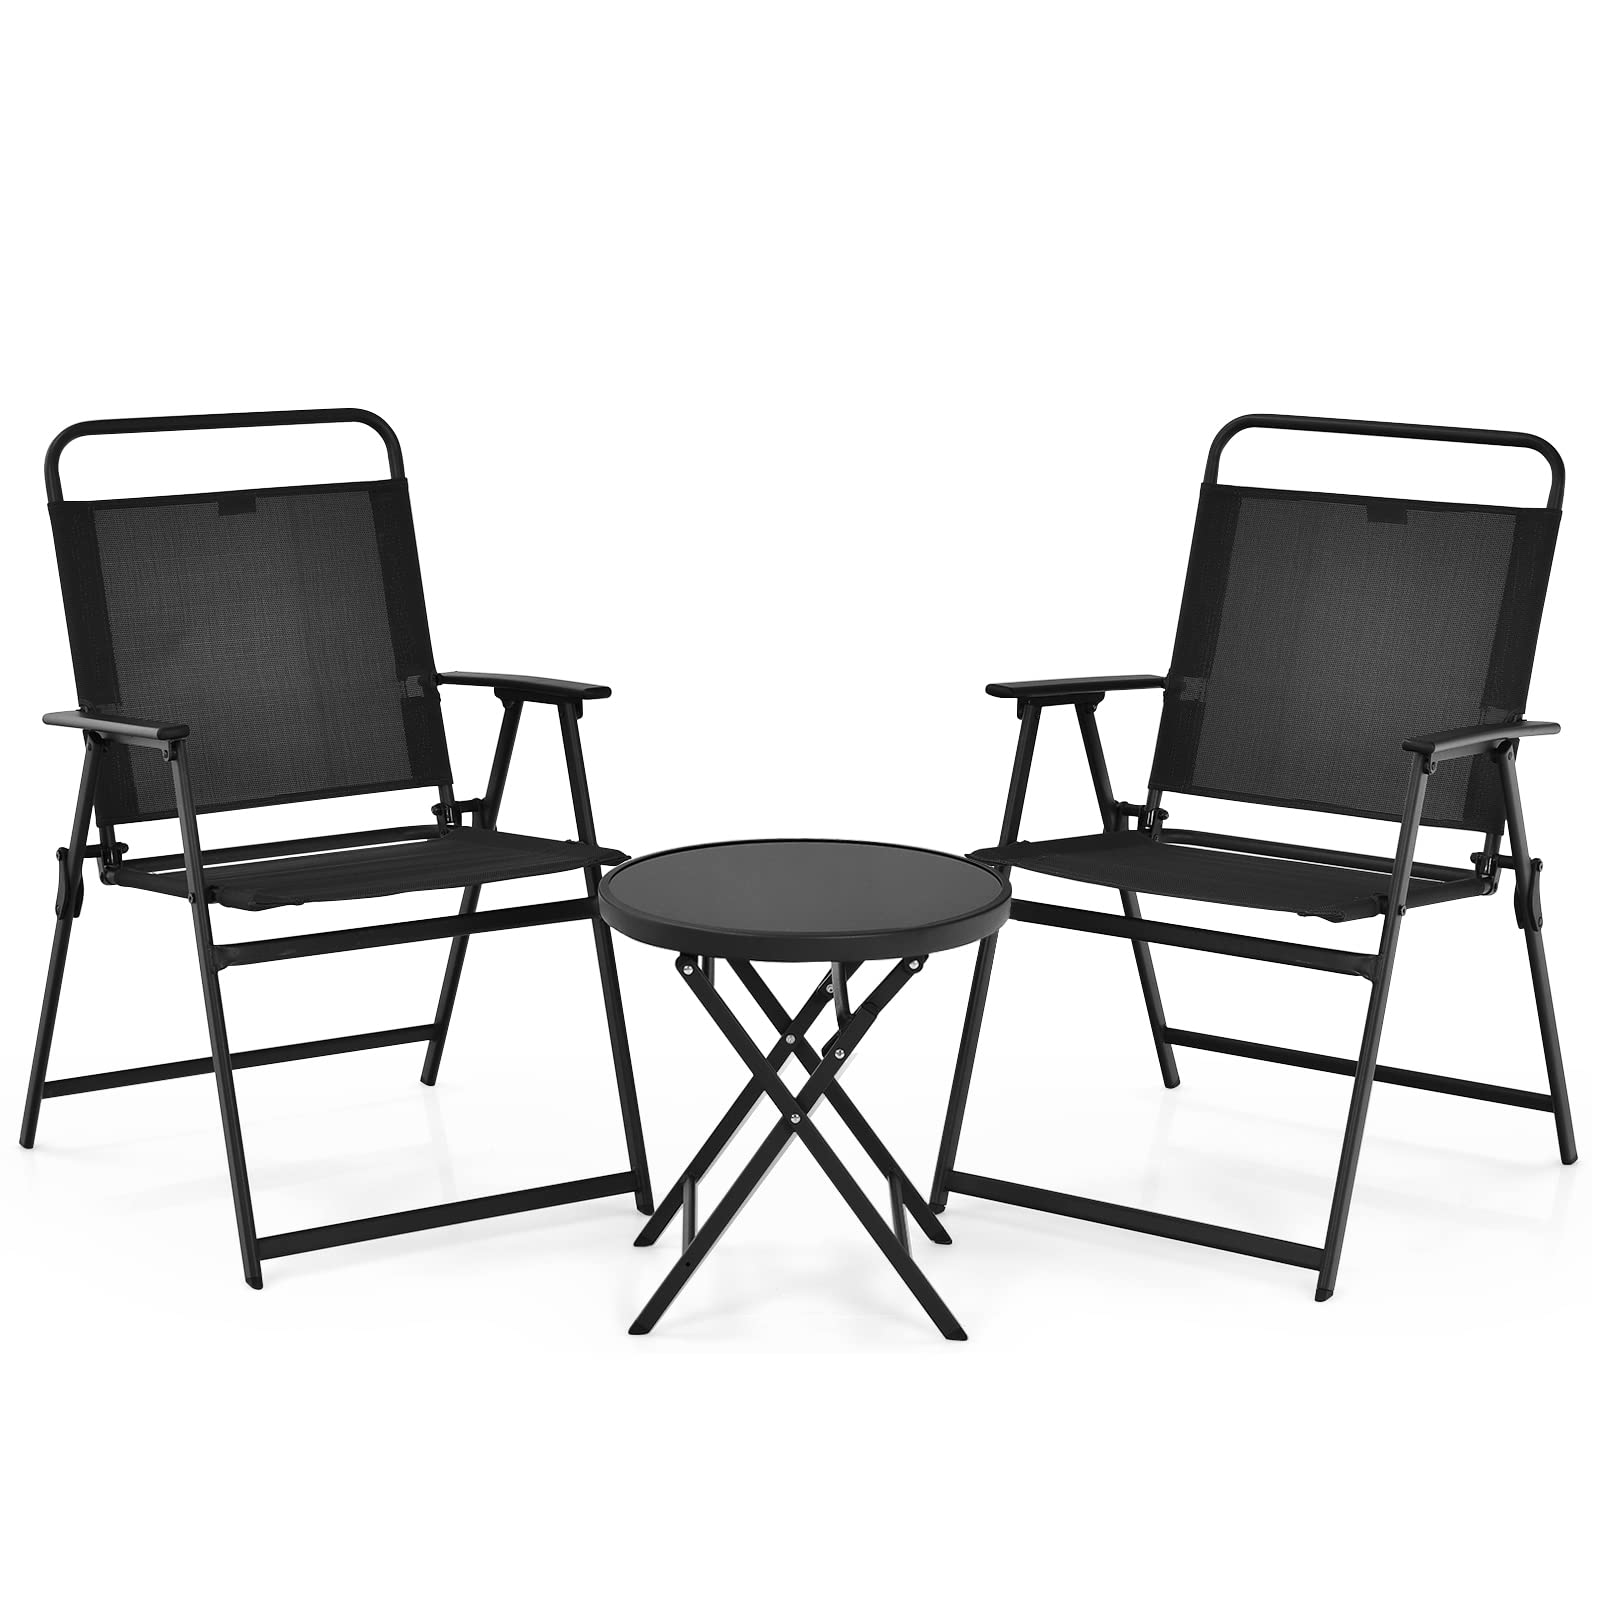 Giantex 3-Piece Patio Table Set, Folding Bistro Set with Tempered Glass Round Table and 2 Lawn Chairs